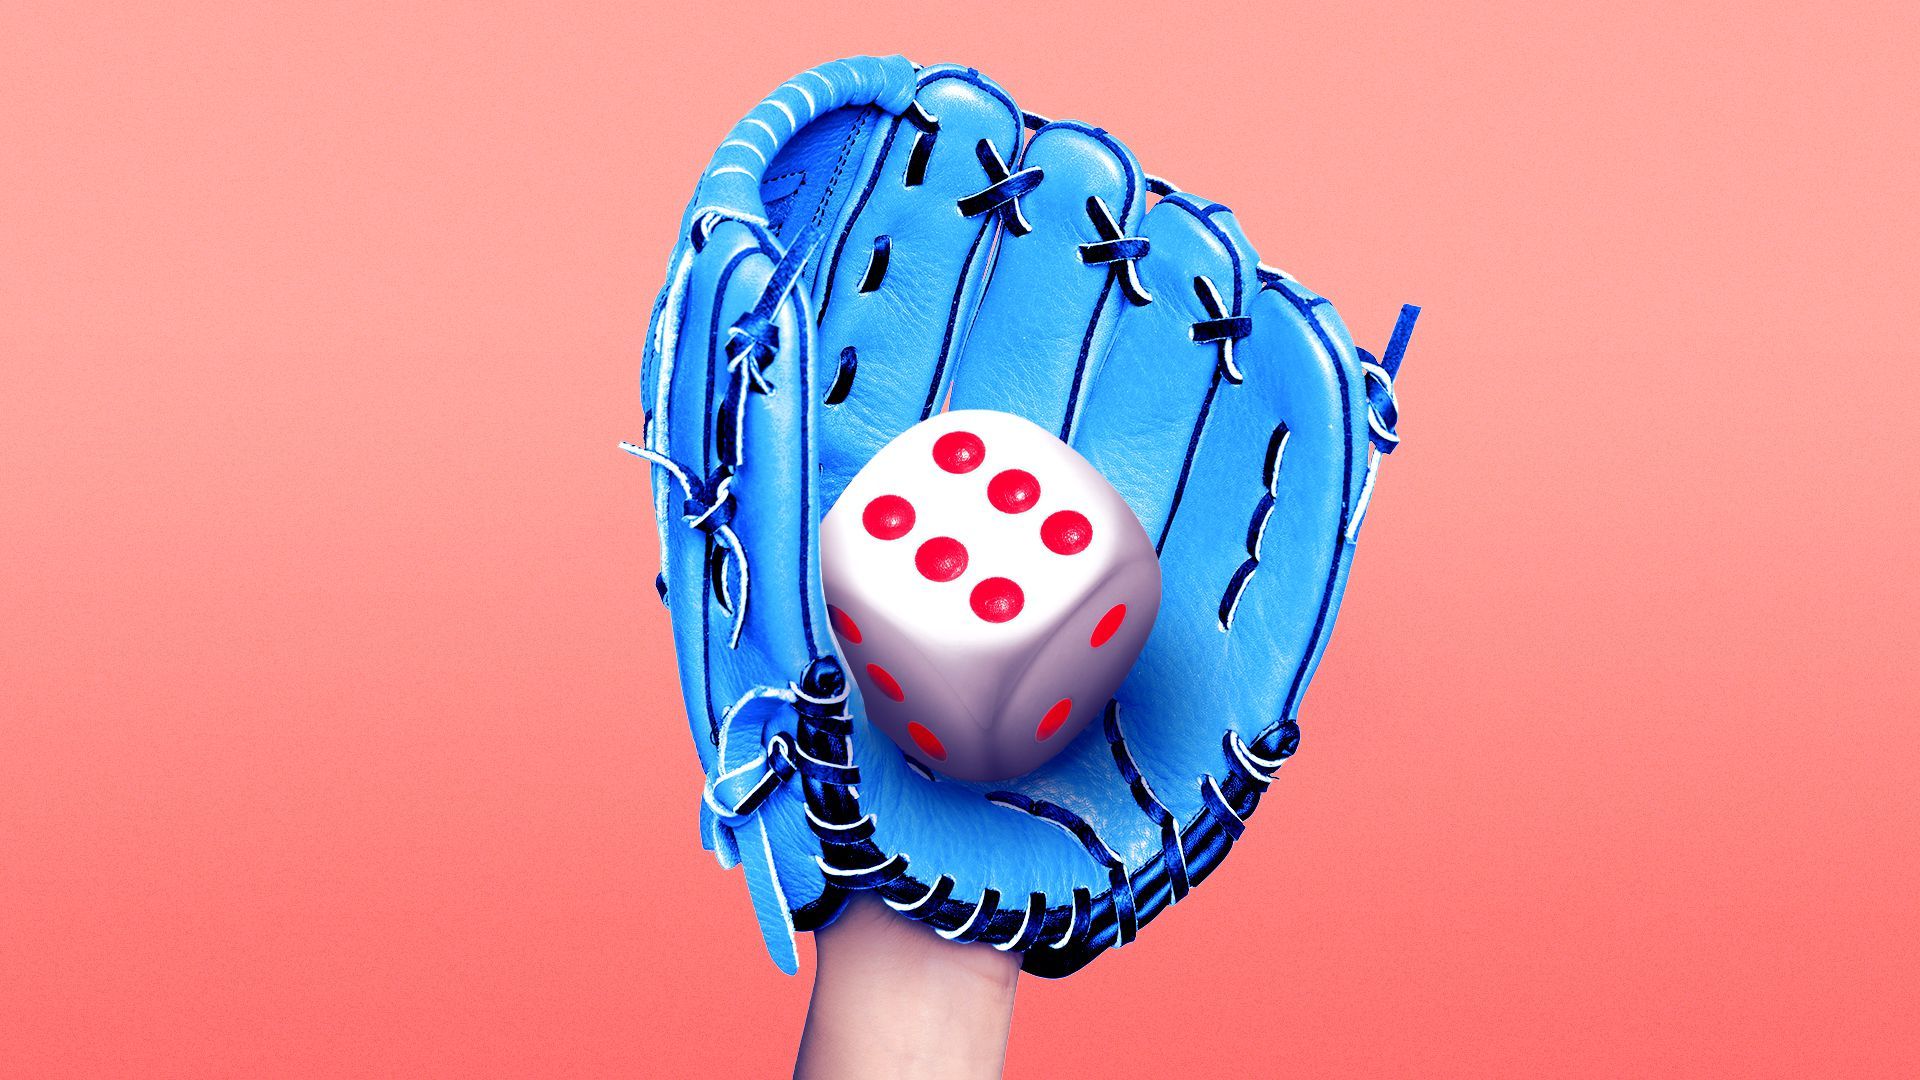 Illustration of a bright blue baseball glove catching a red and white playing dice